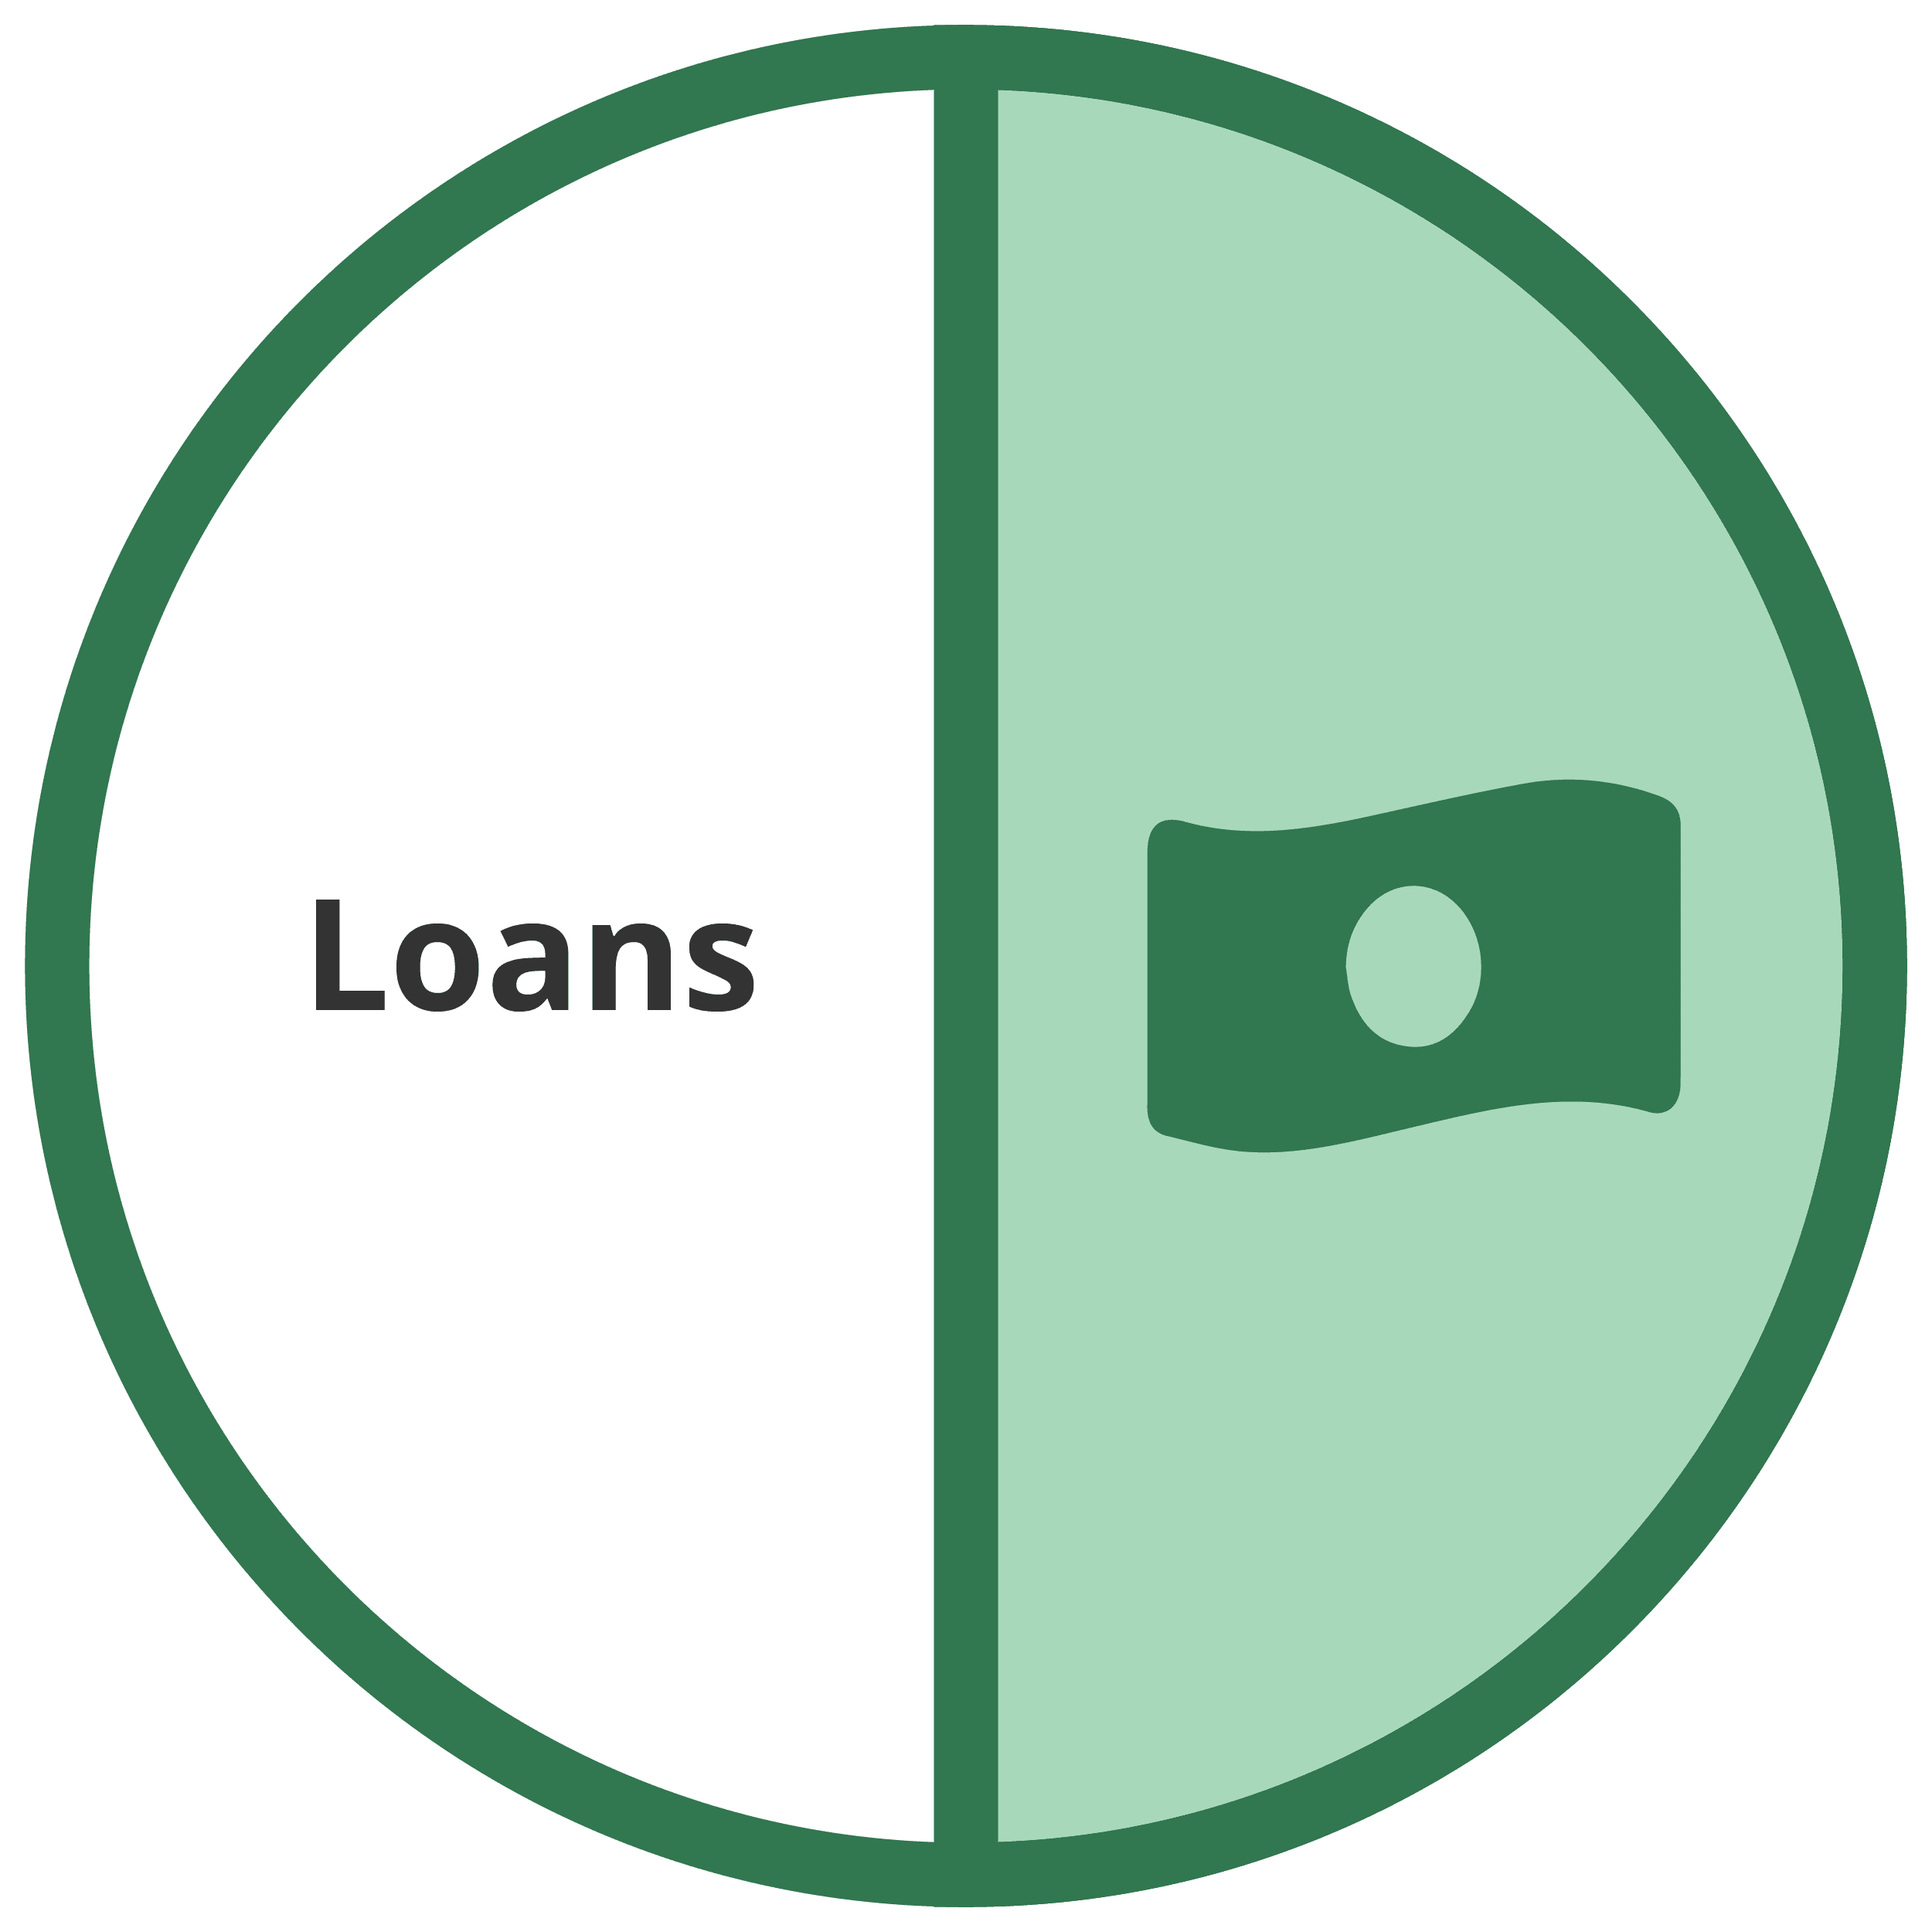 8 steps to get a personal loan in South Africa